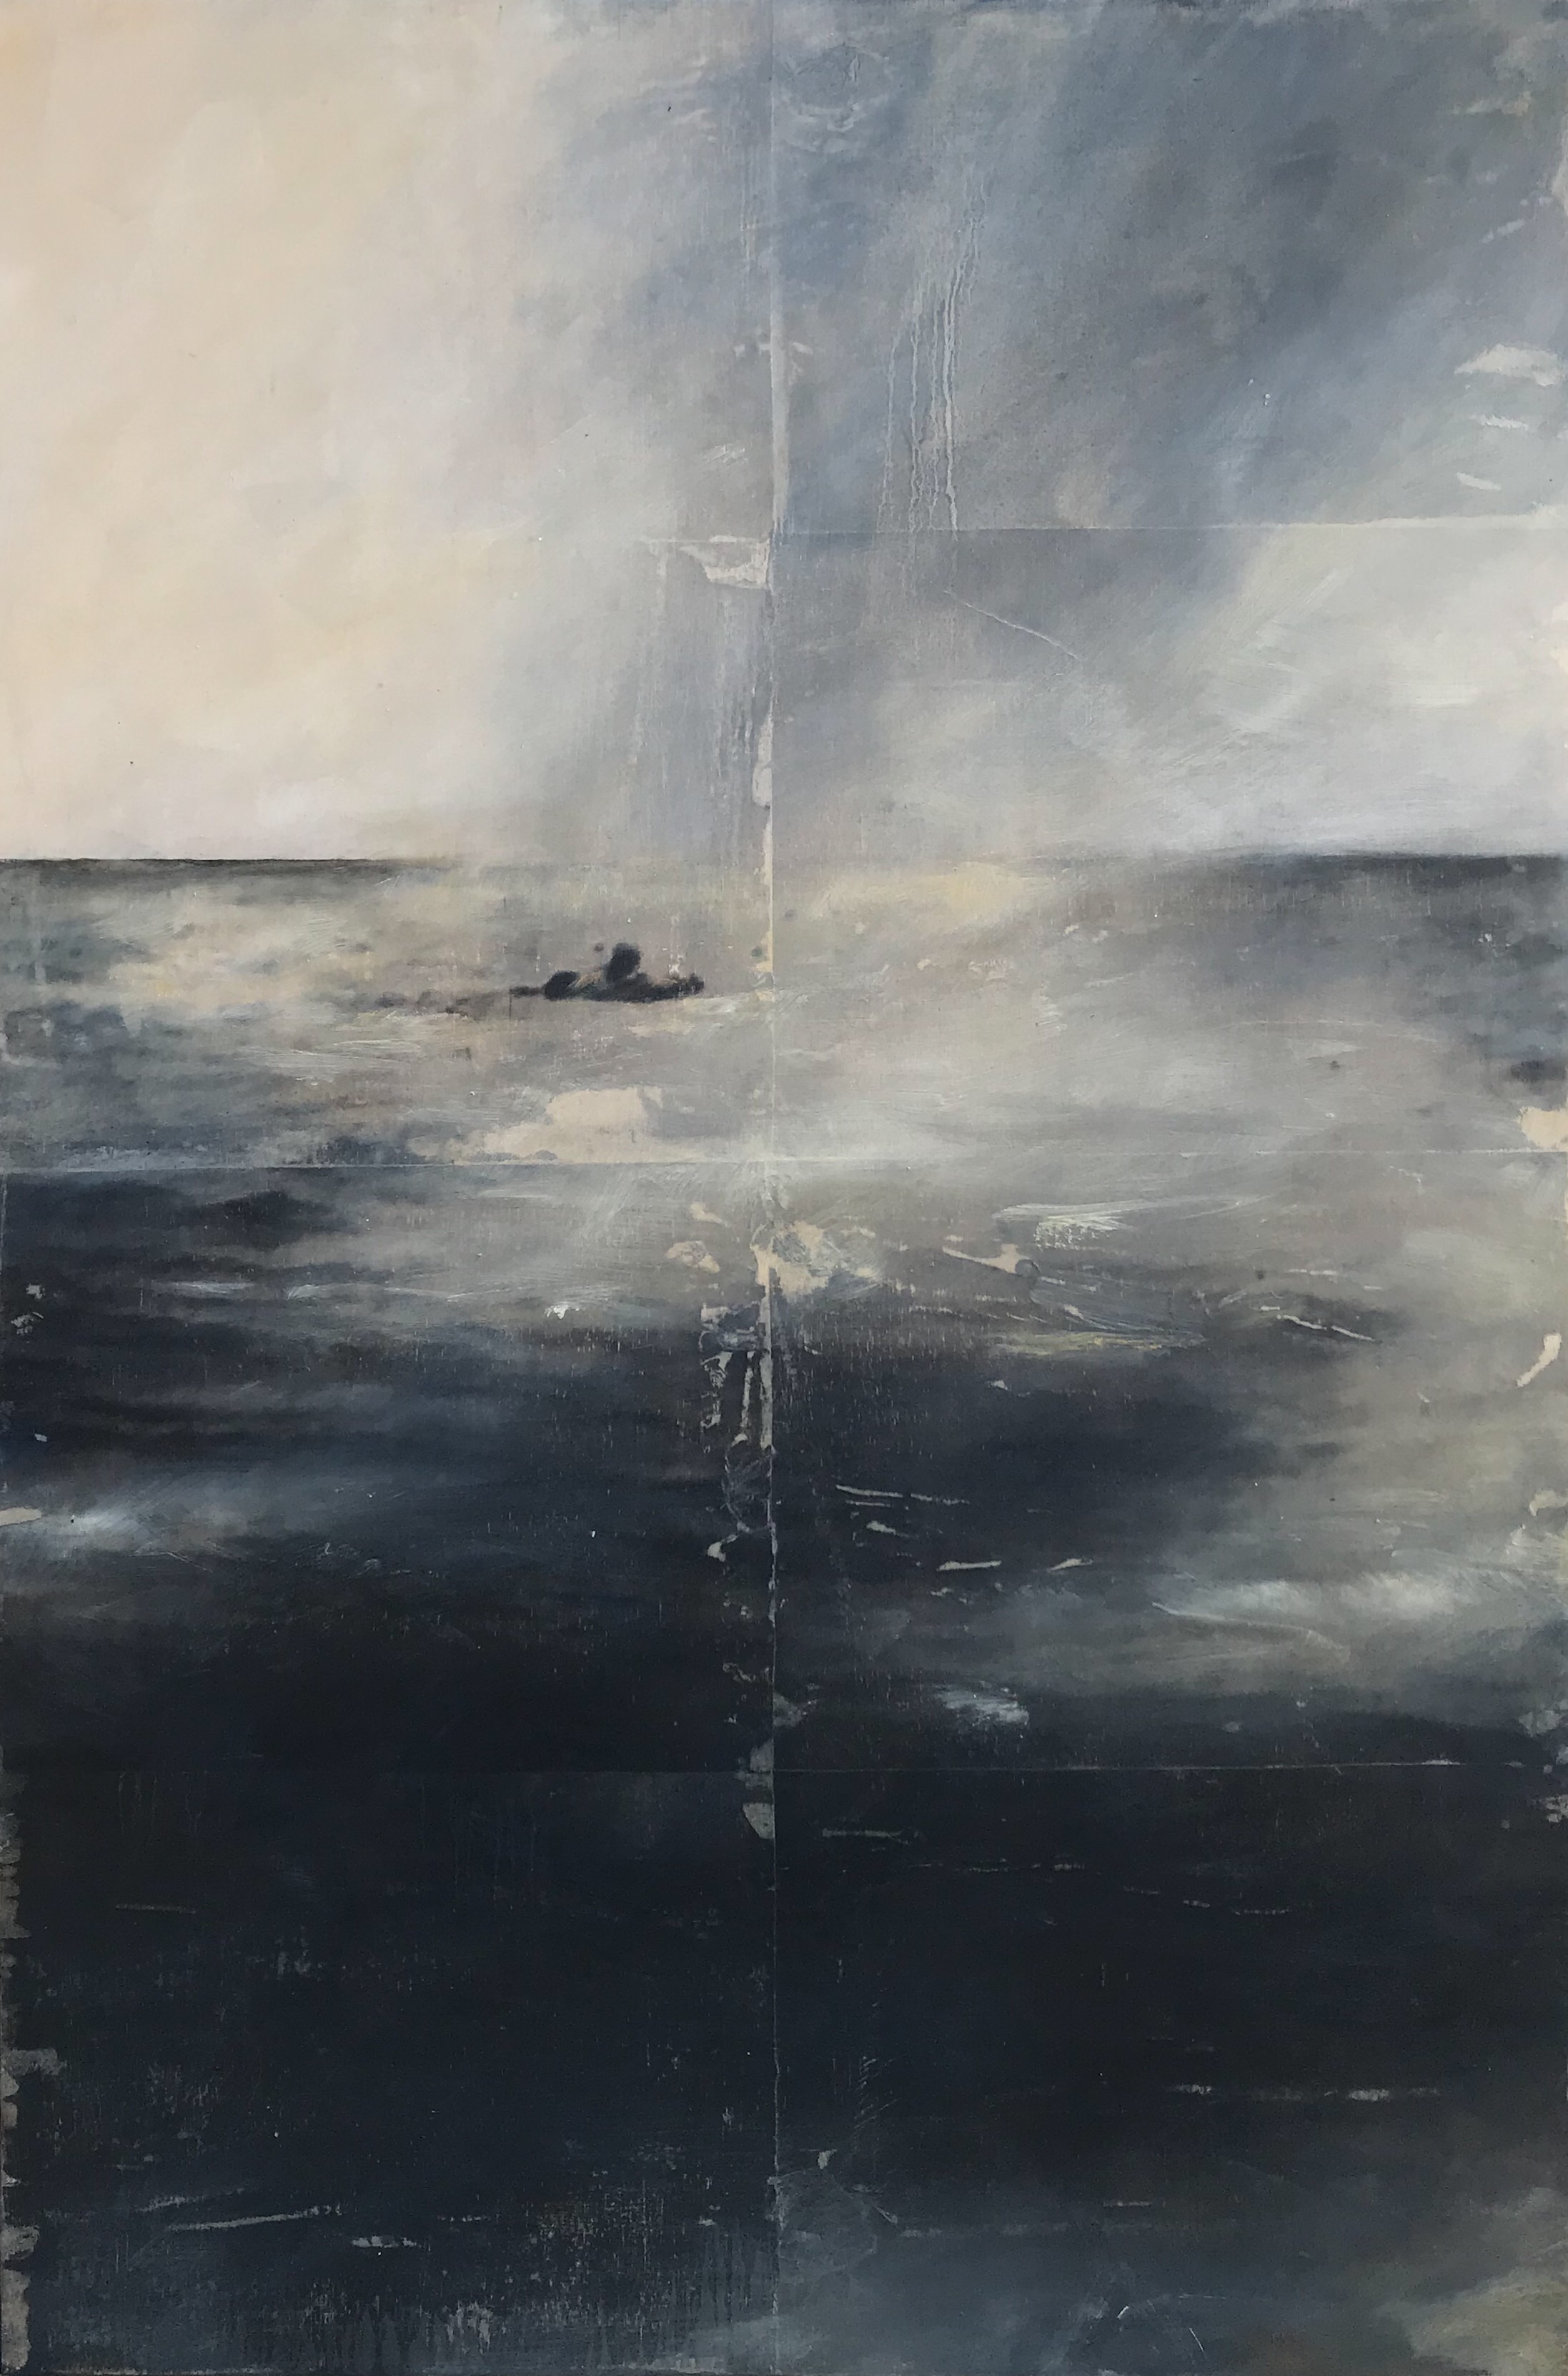 Adrift, 20 x 30 inches, oil and mixed media on panel